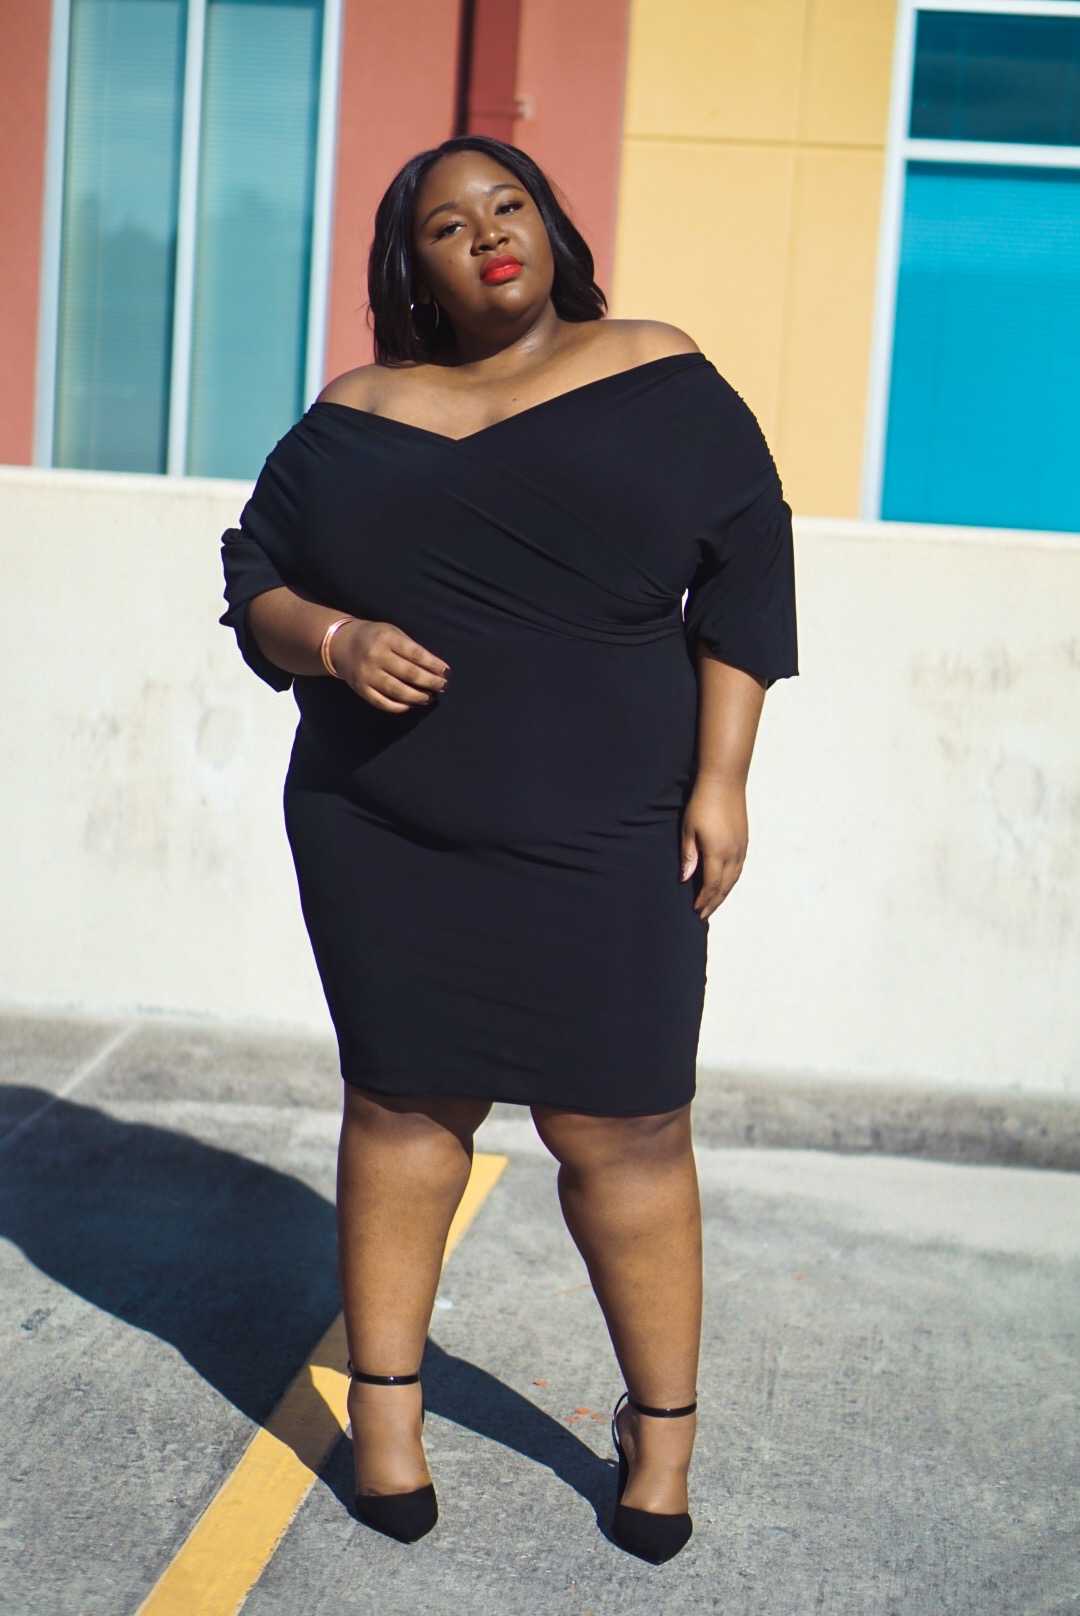 Plus Size Outfits
